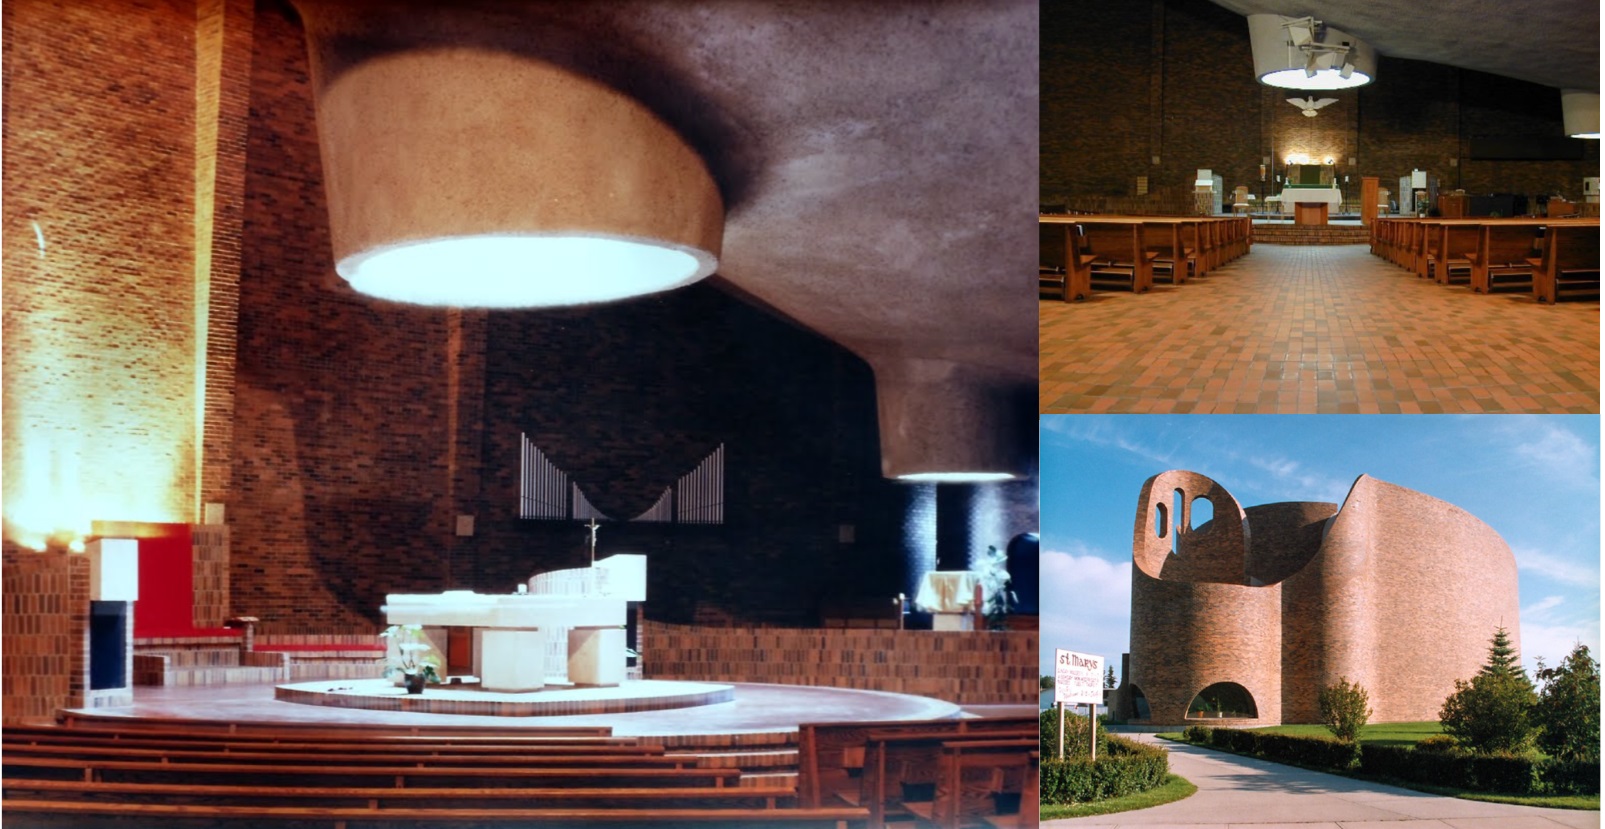 Two interior images of St Mary's Catholic Church, one exterior image